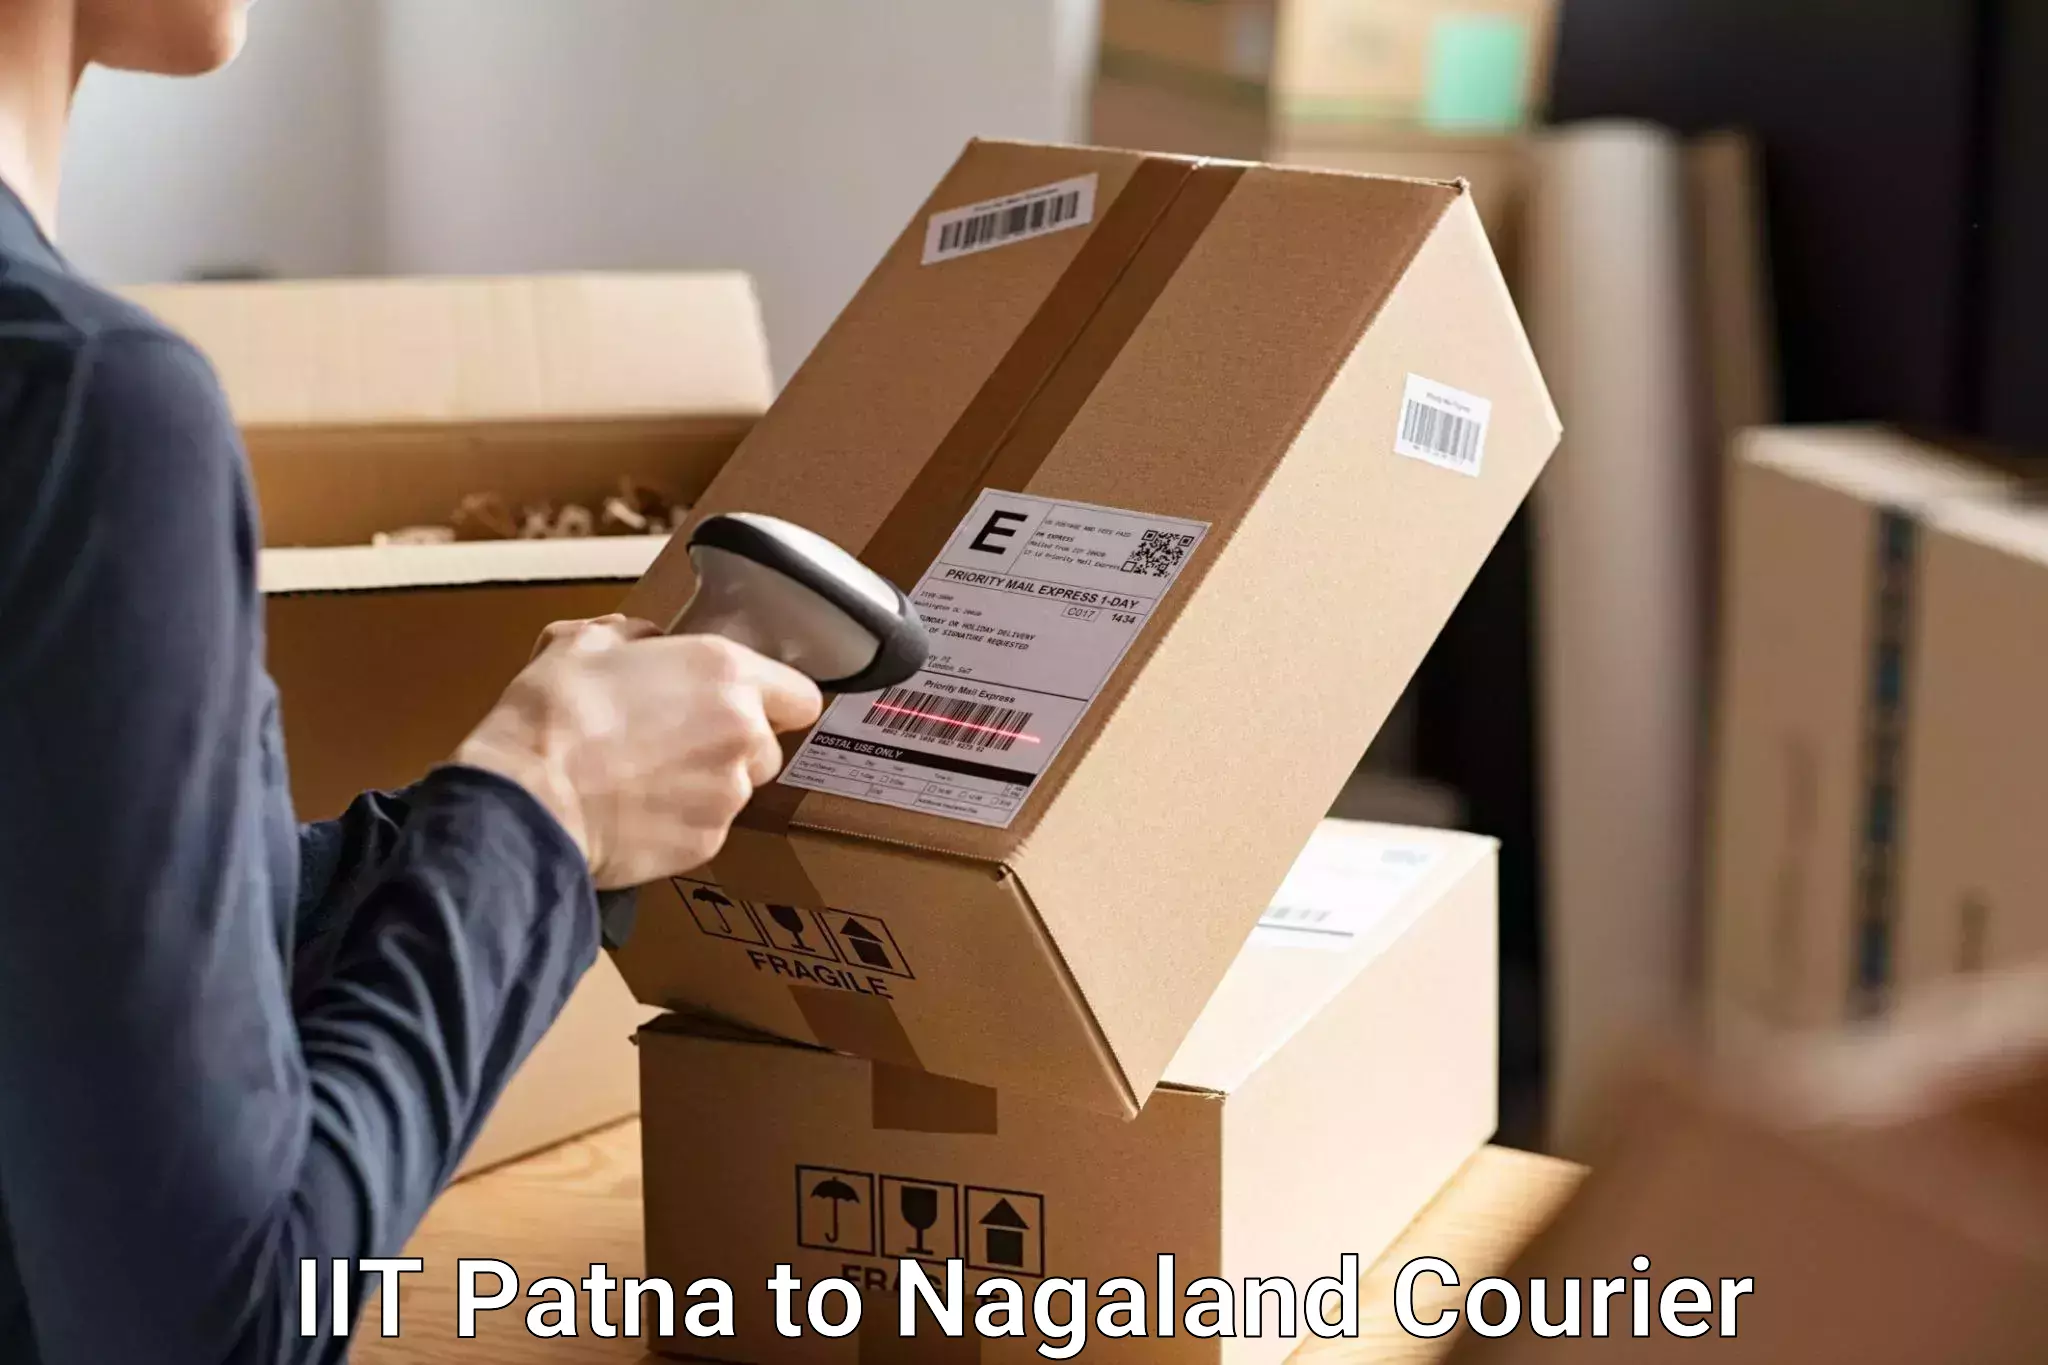 Baggage transport logistics in IIT Patna to Mon